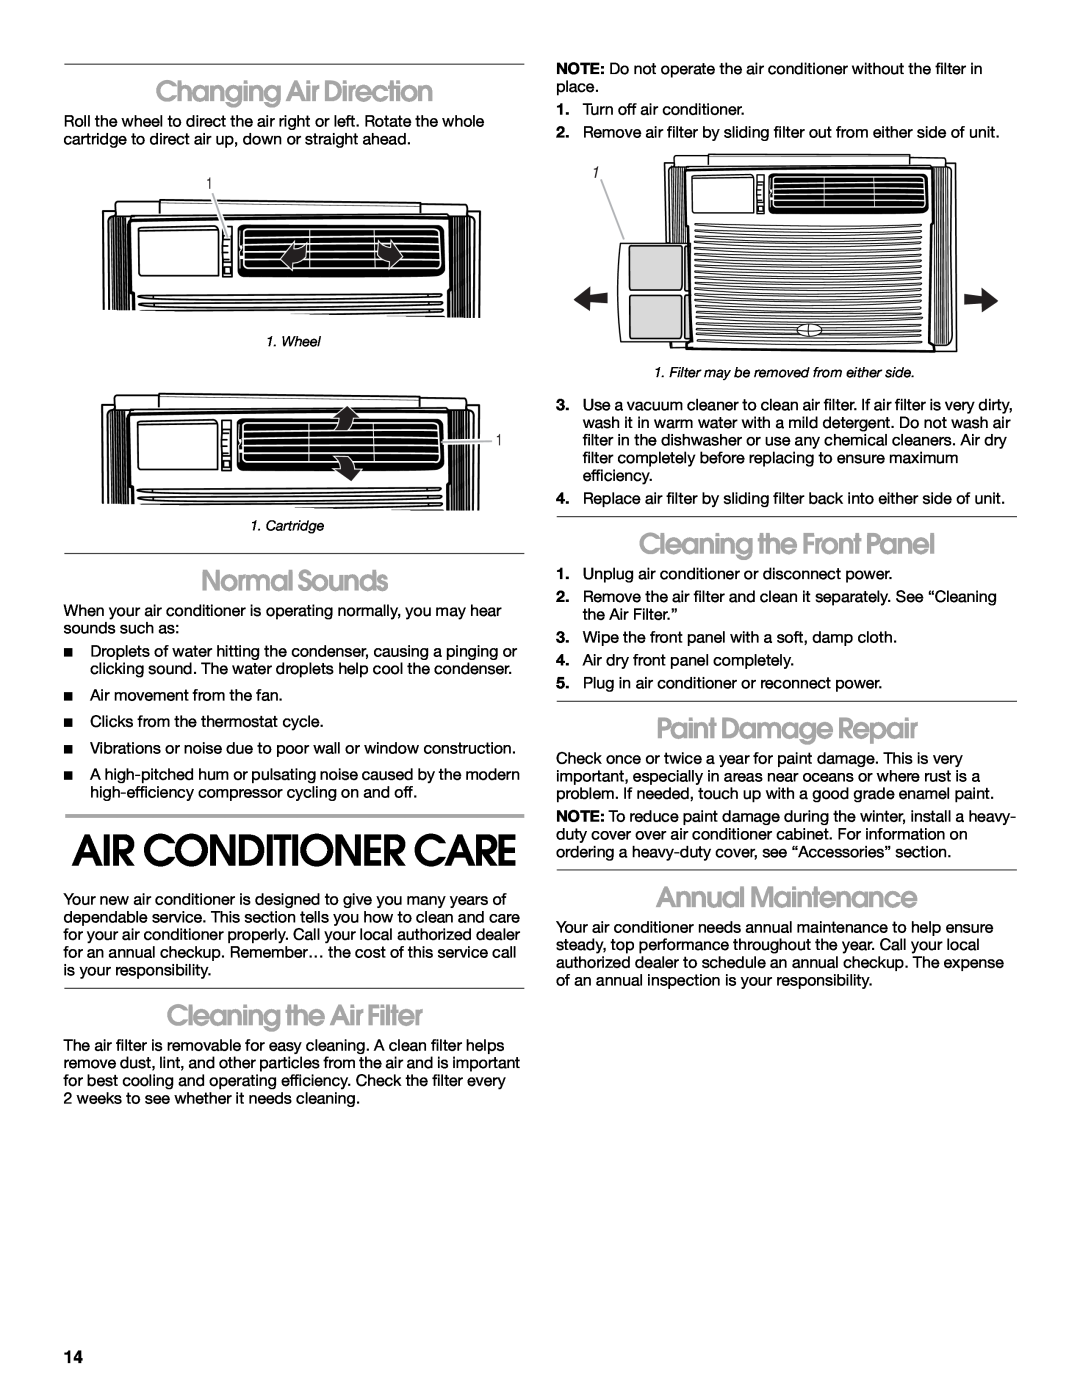 Whirlpool 1187361 manual Changing Air Direction, Normal Sounds, Cleaning the Air Filter, Cleaning the Front Panel 